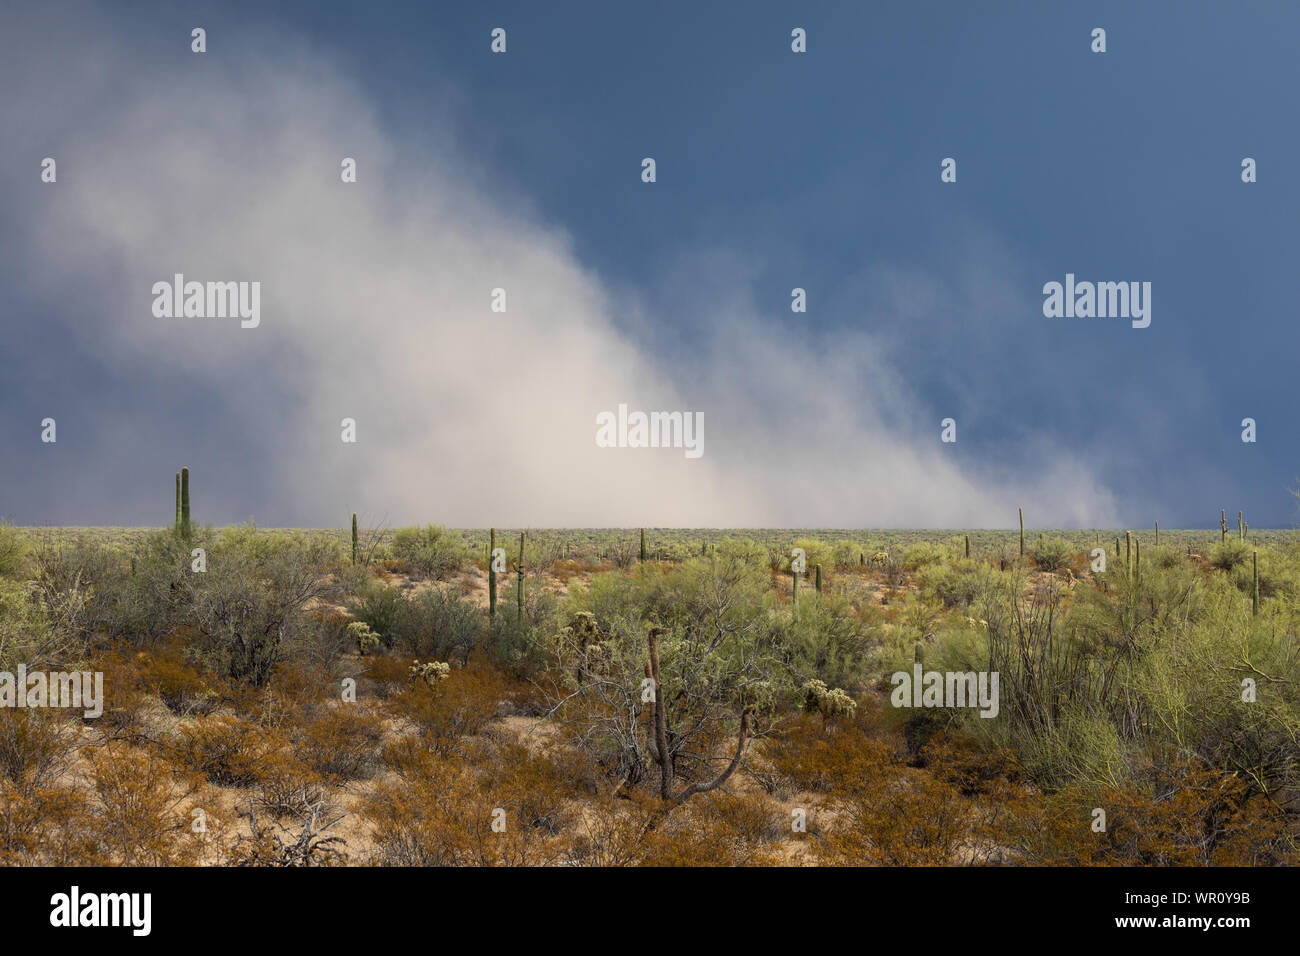 Thunderstorm outflow winds kick up a plume of blowing dust over the Sonoyta Valley in Organ Pipe Cactus National Monument, Pima County, Arizona, USA Stock Photo